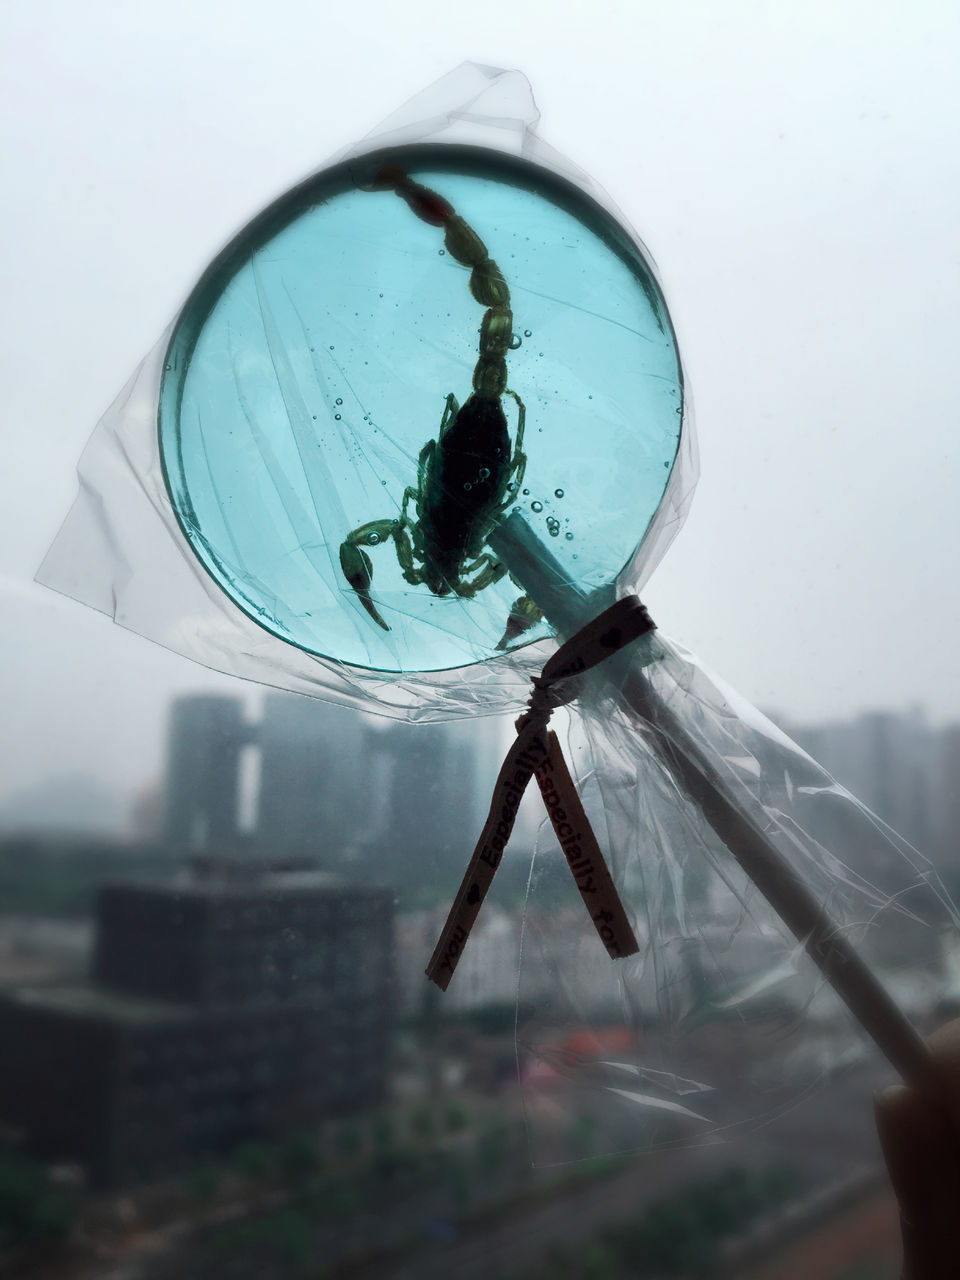 CLOSE-UP OF INSECT ON GLASS WITH REFLECTION OF WATER